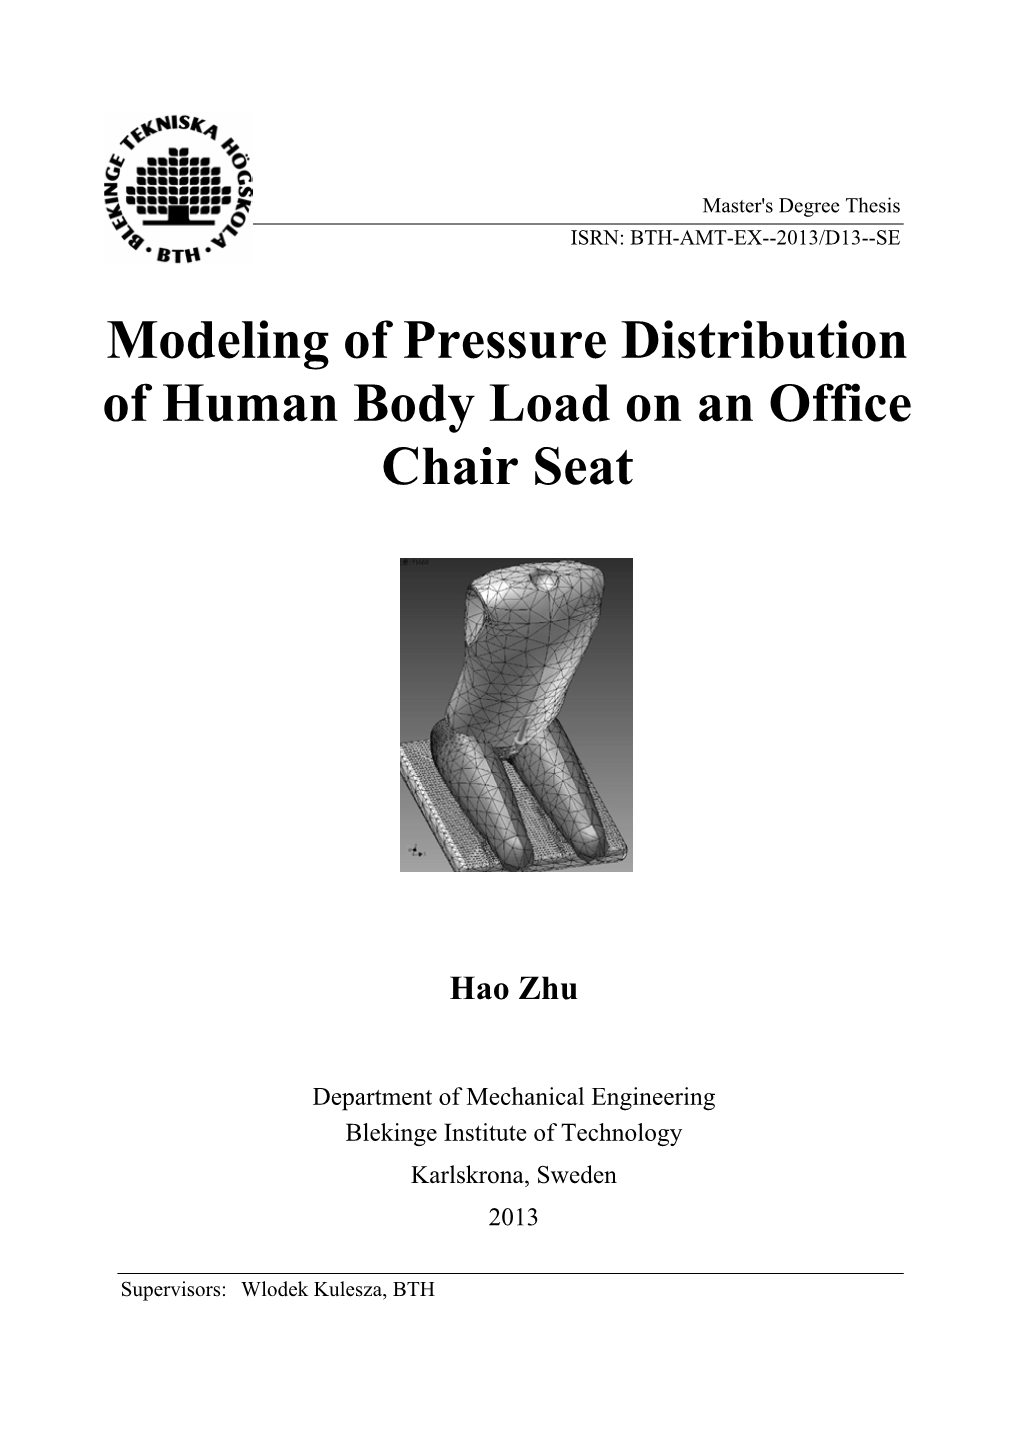 Modeling of Pressure Distribution of Human Body Load on an Office